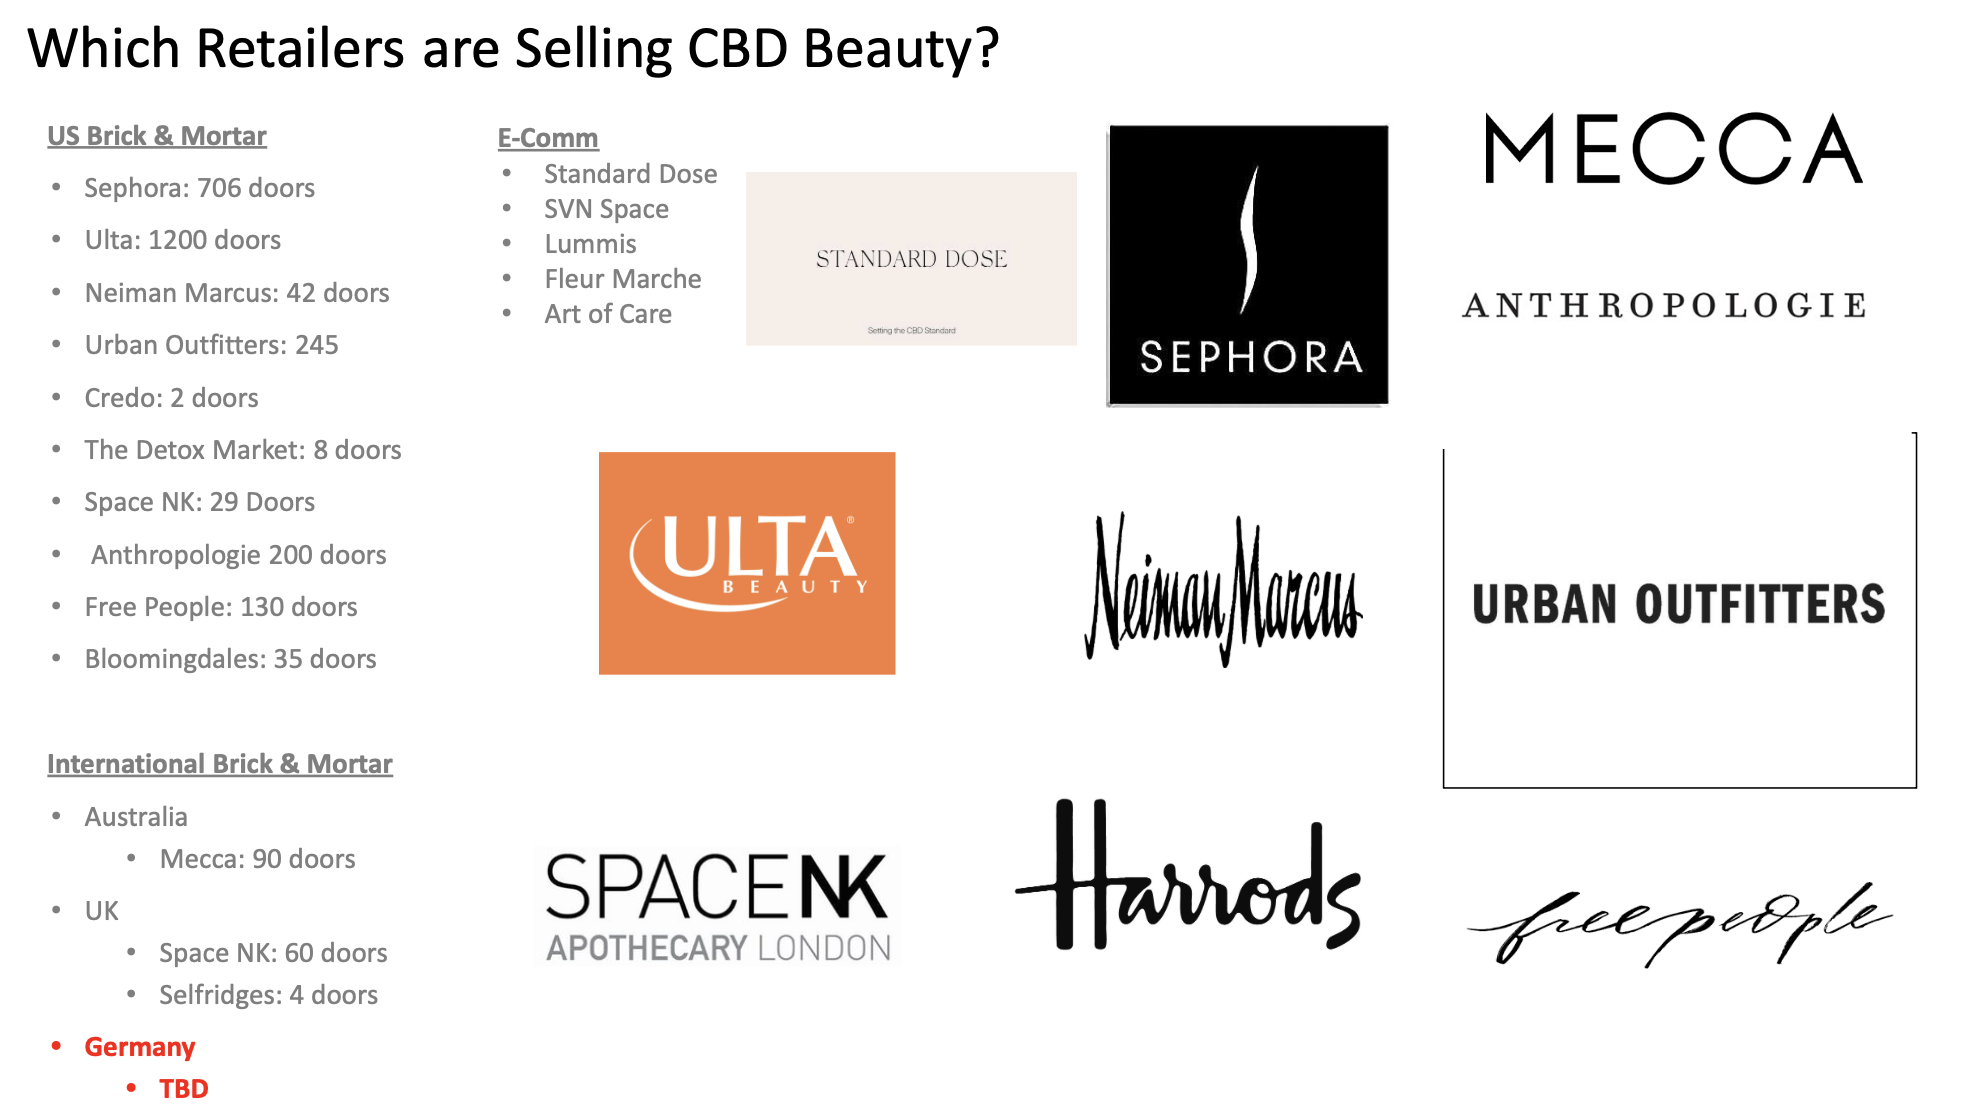 The before image from Ambari's old investor deck showing which retailers are selling CBD beauty